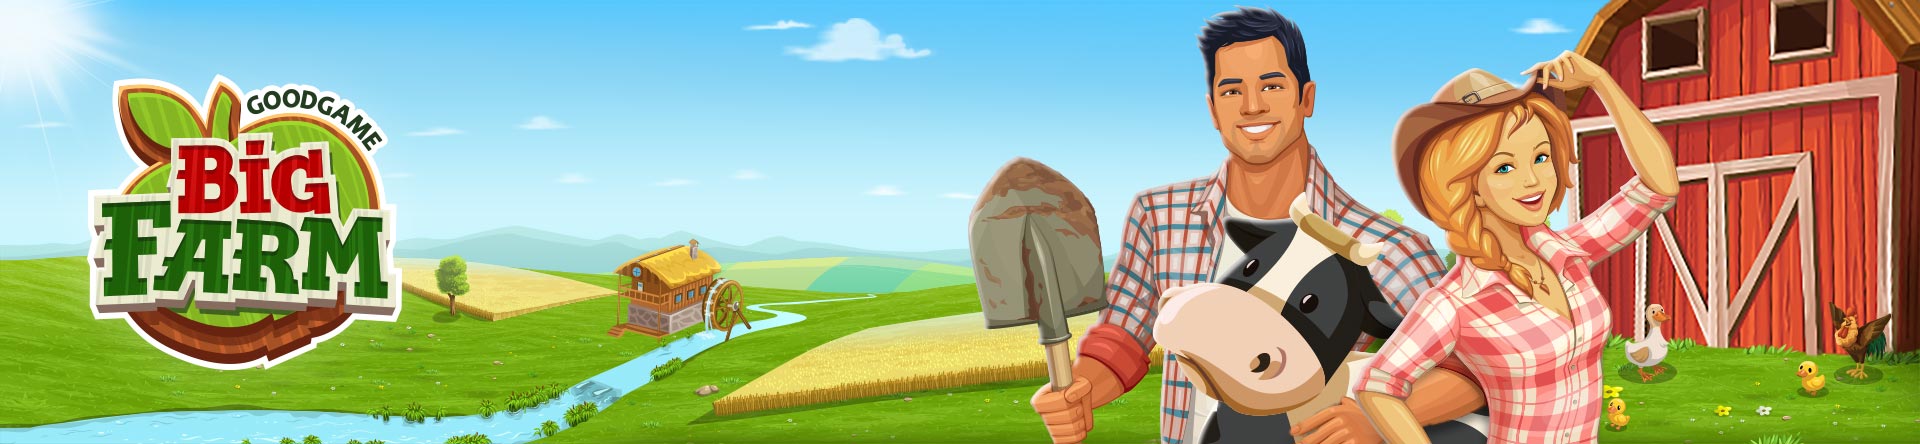 what is big farm goodgame